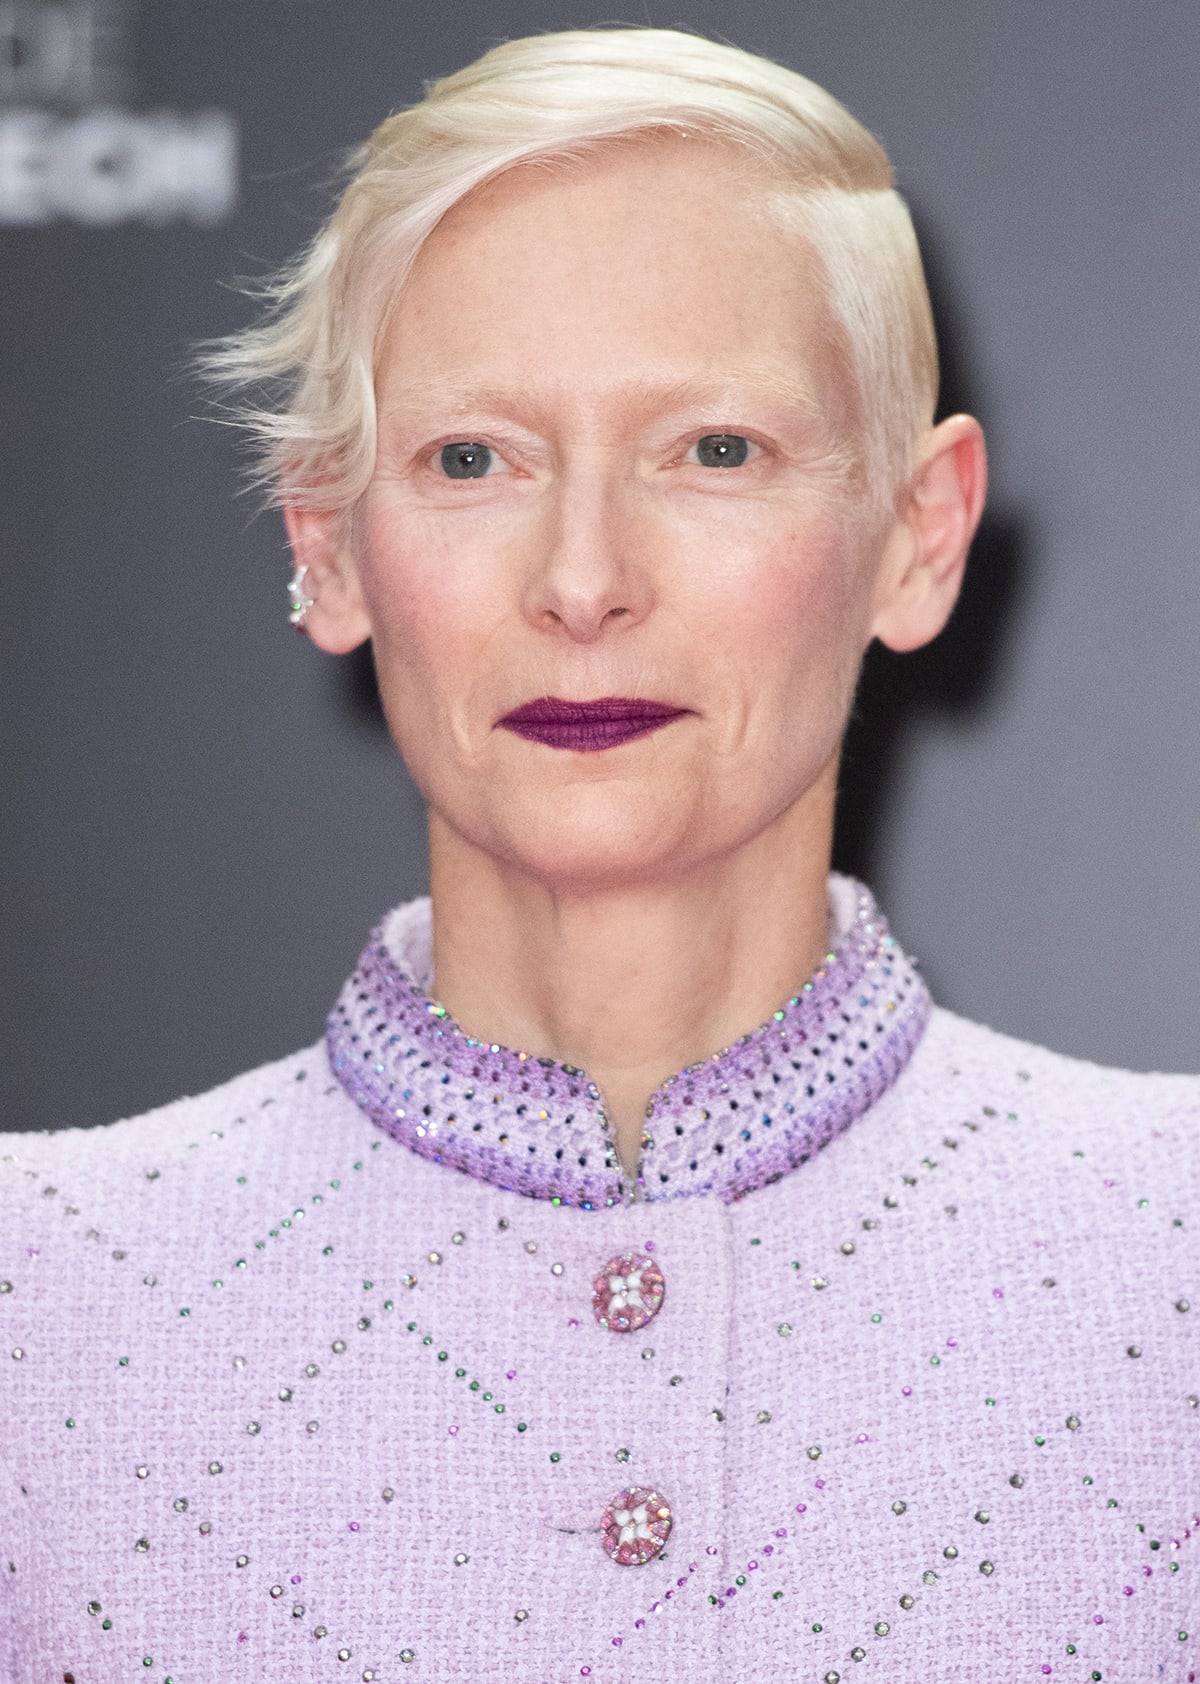 Tilda Swinton adds her signature edge to the look by wearing a single diamond earring and sporting deep purple lipstick